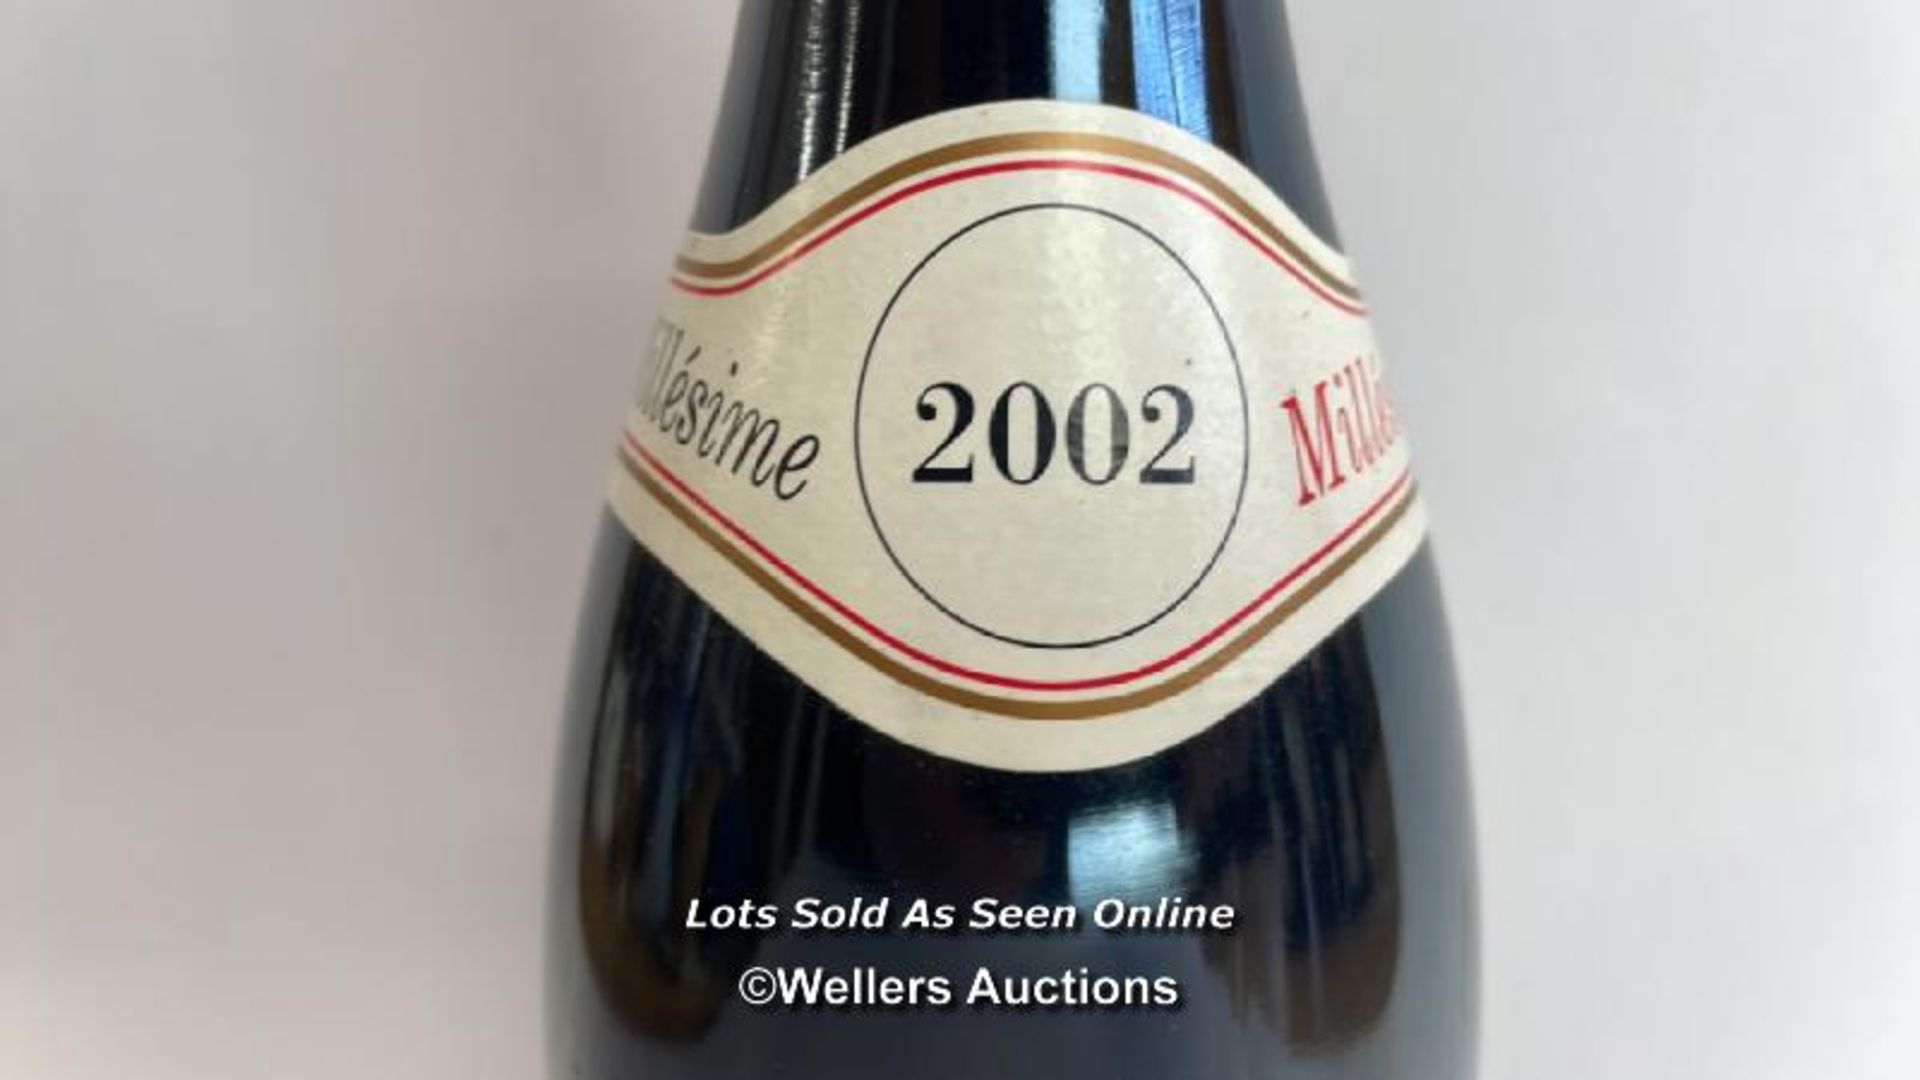 2002 Millesime Crozes Hermitage Paul Jaboulet Aine, 75cl, 12.5% VOL / Please see images for fill - Image 5 of 7